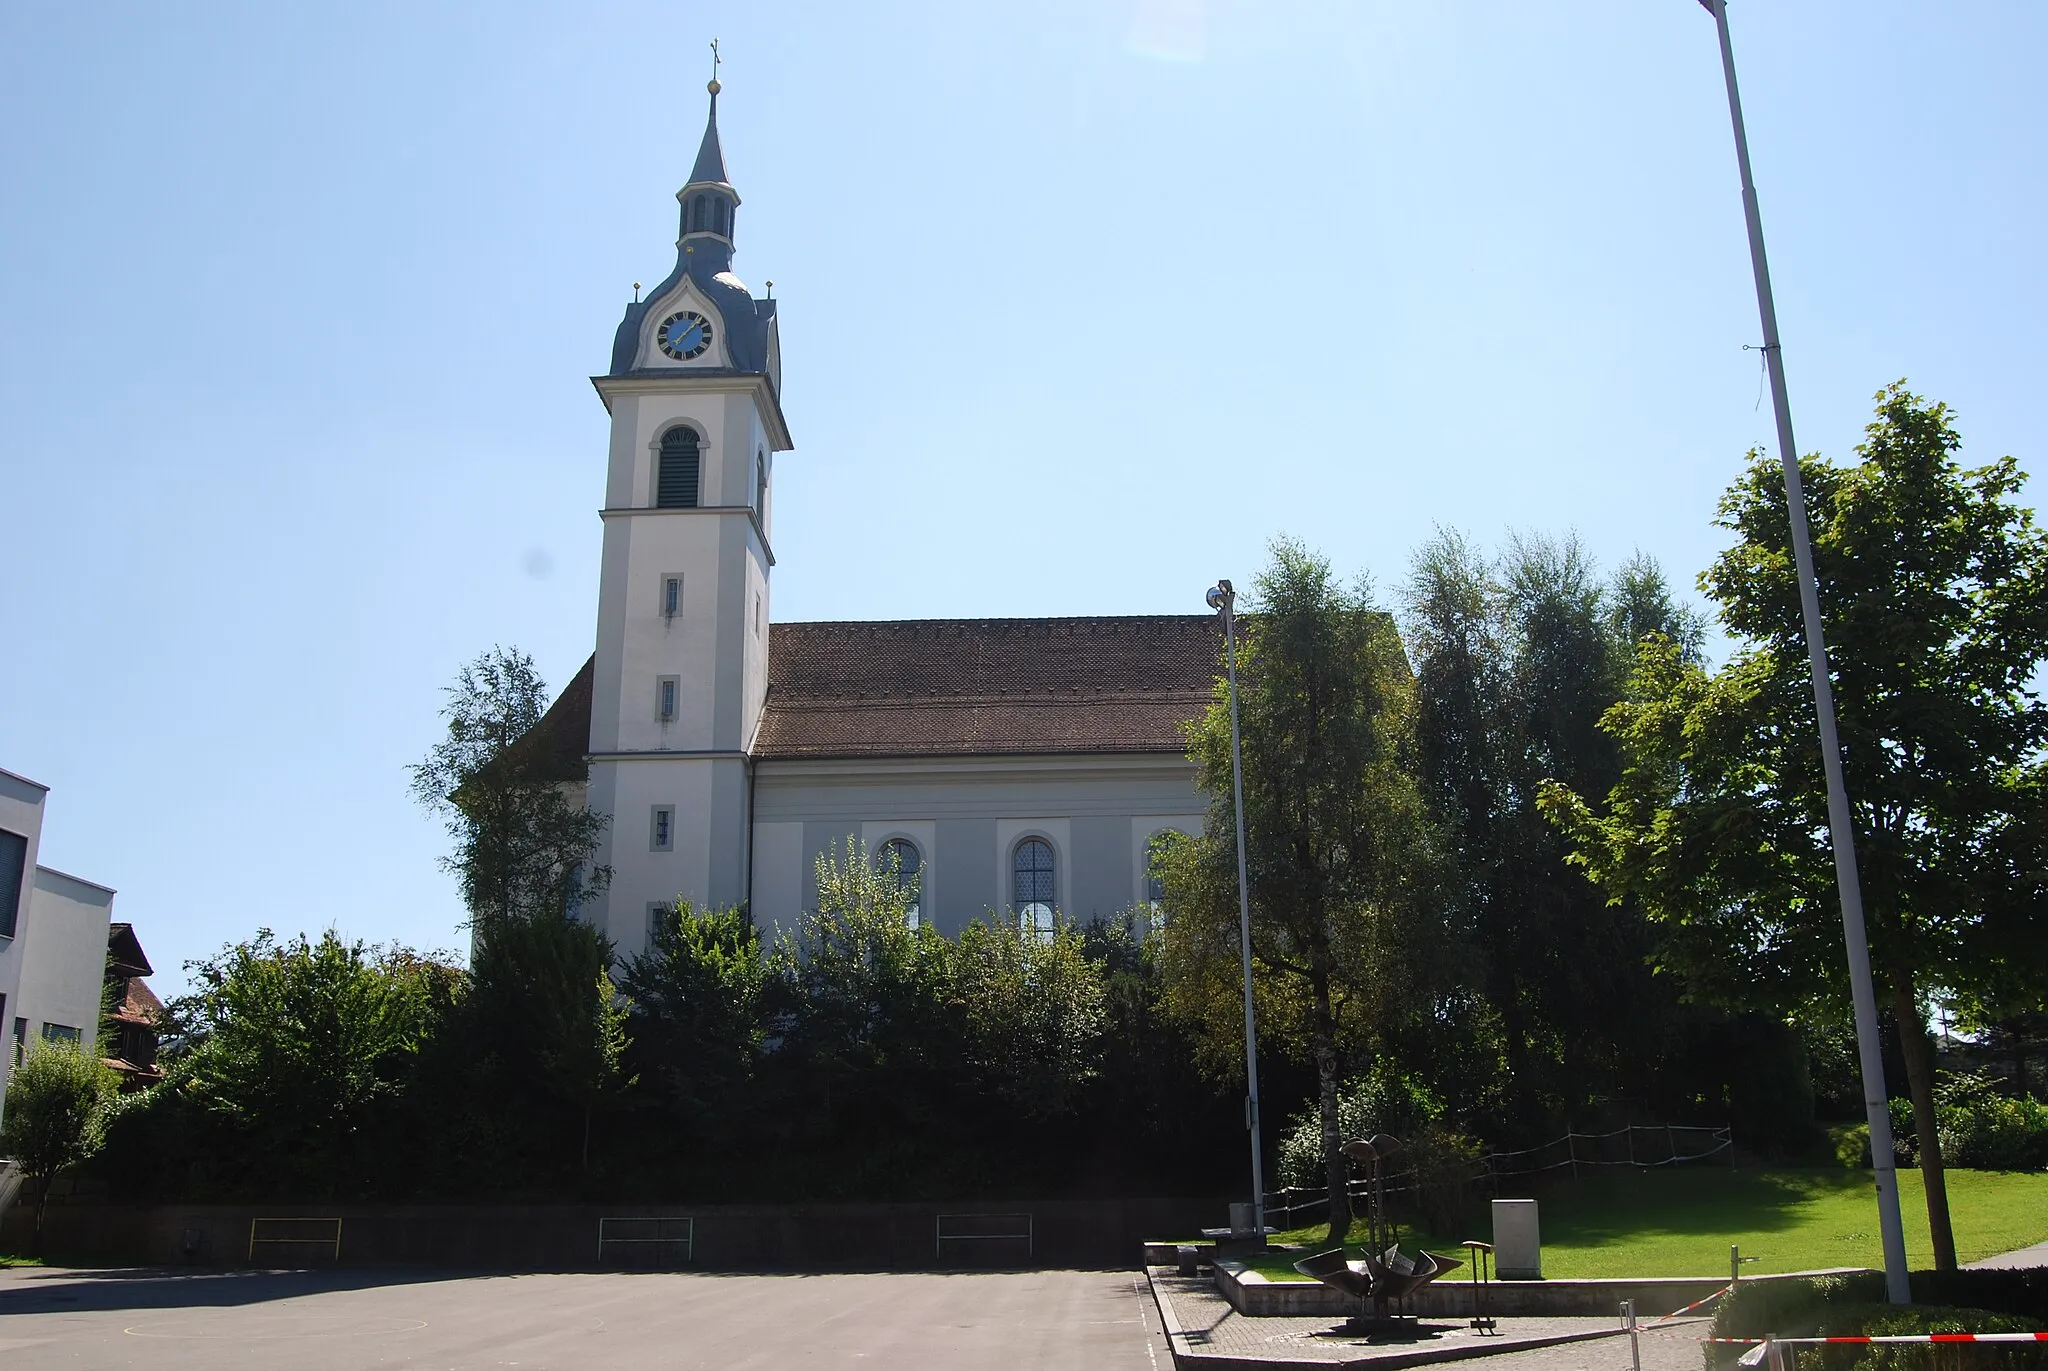 Photo showing: St. Martin Church of Adligenswil, canton of Lucerne, Switzerland